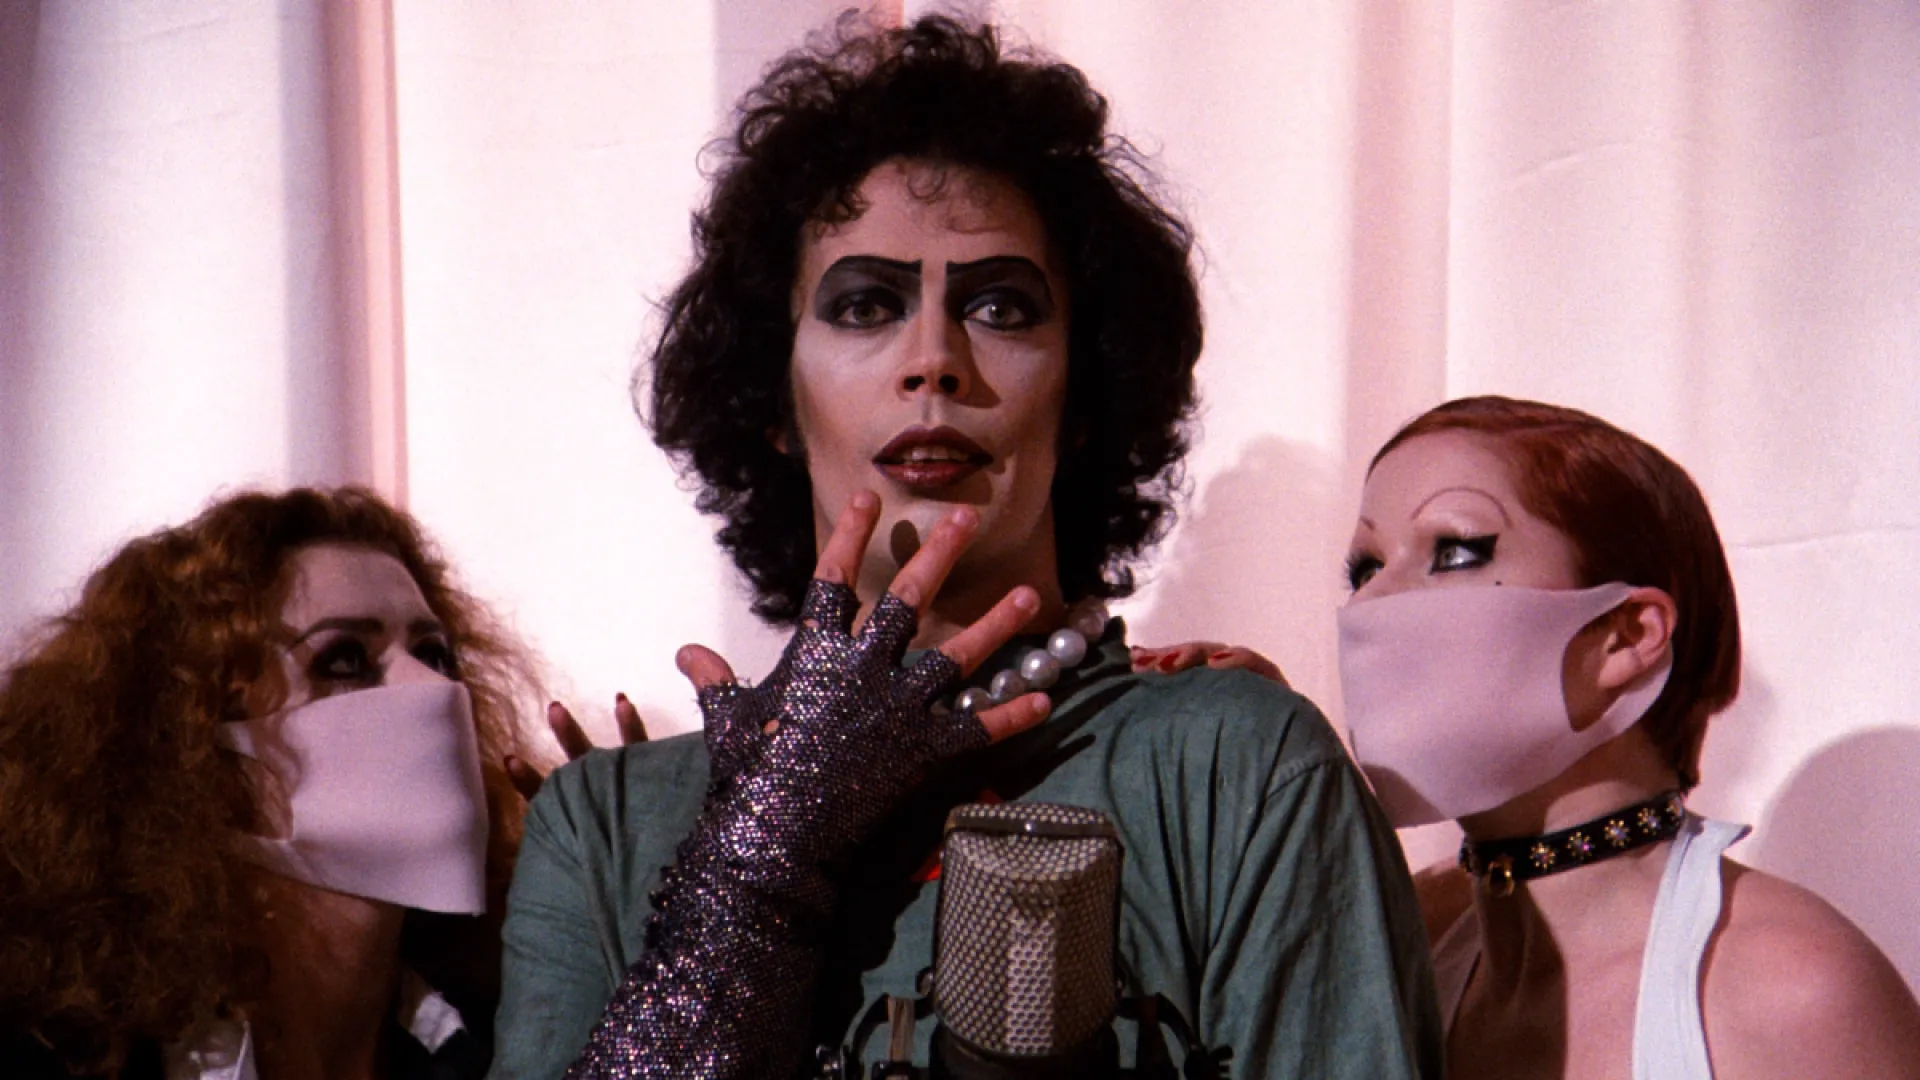 Frank-N-Furter in The Rocky Horror Picture Show.